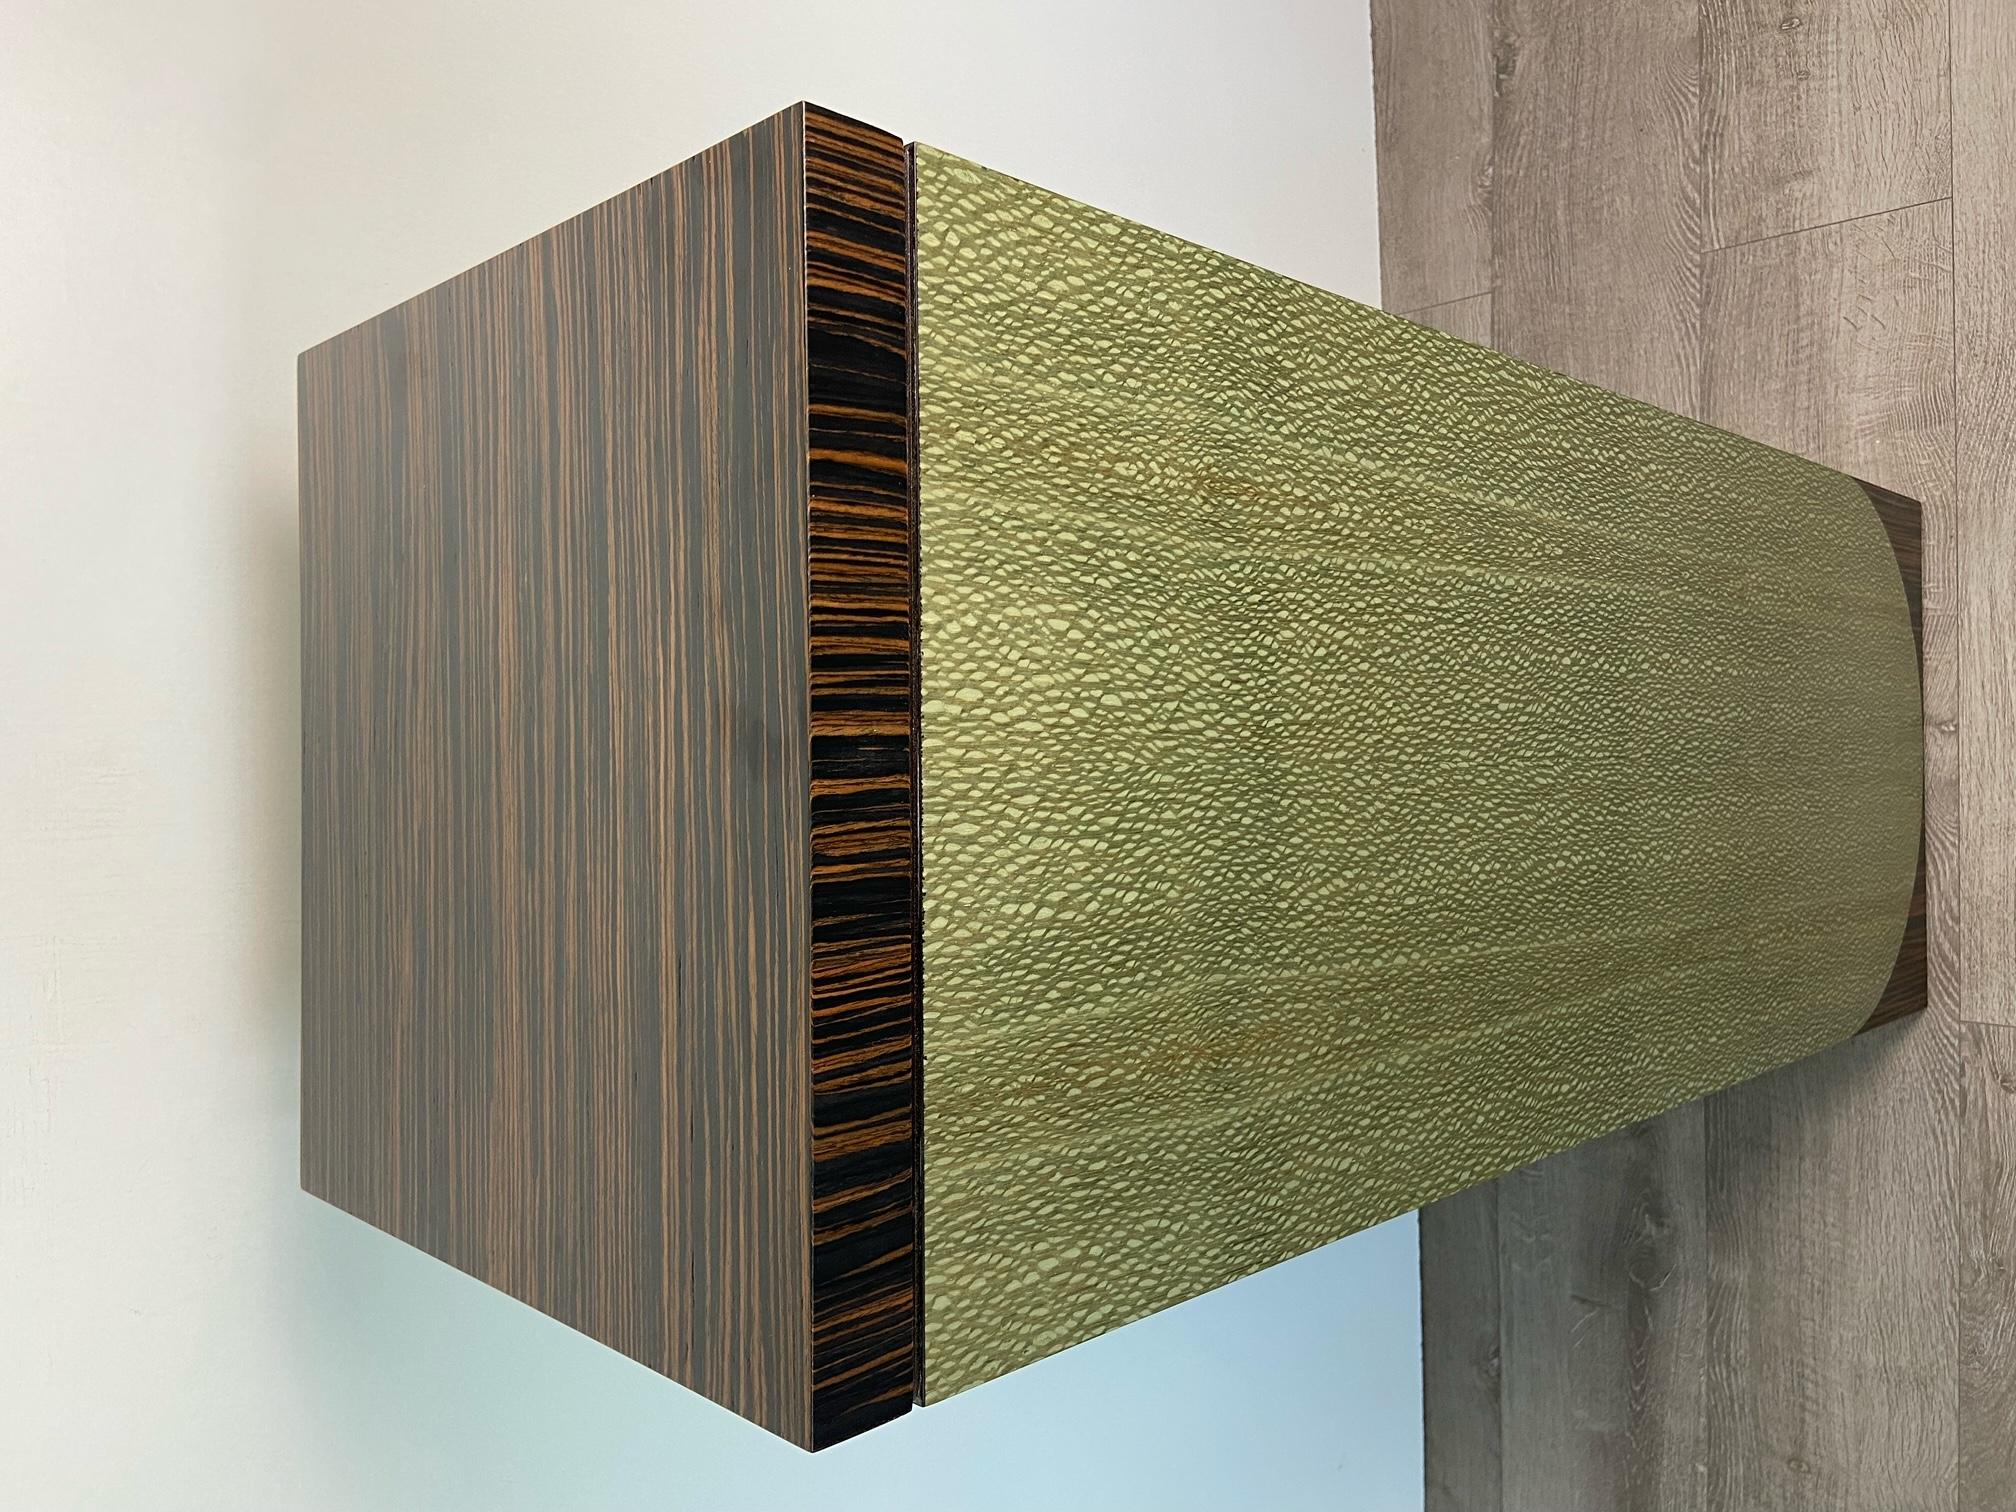 Wood veneer plinth.

As with all our furniture, this plinth is made to order and is therefore highly customisable, including in size and finish. The customisation fee is only 10%, which is added to the retail price.
